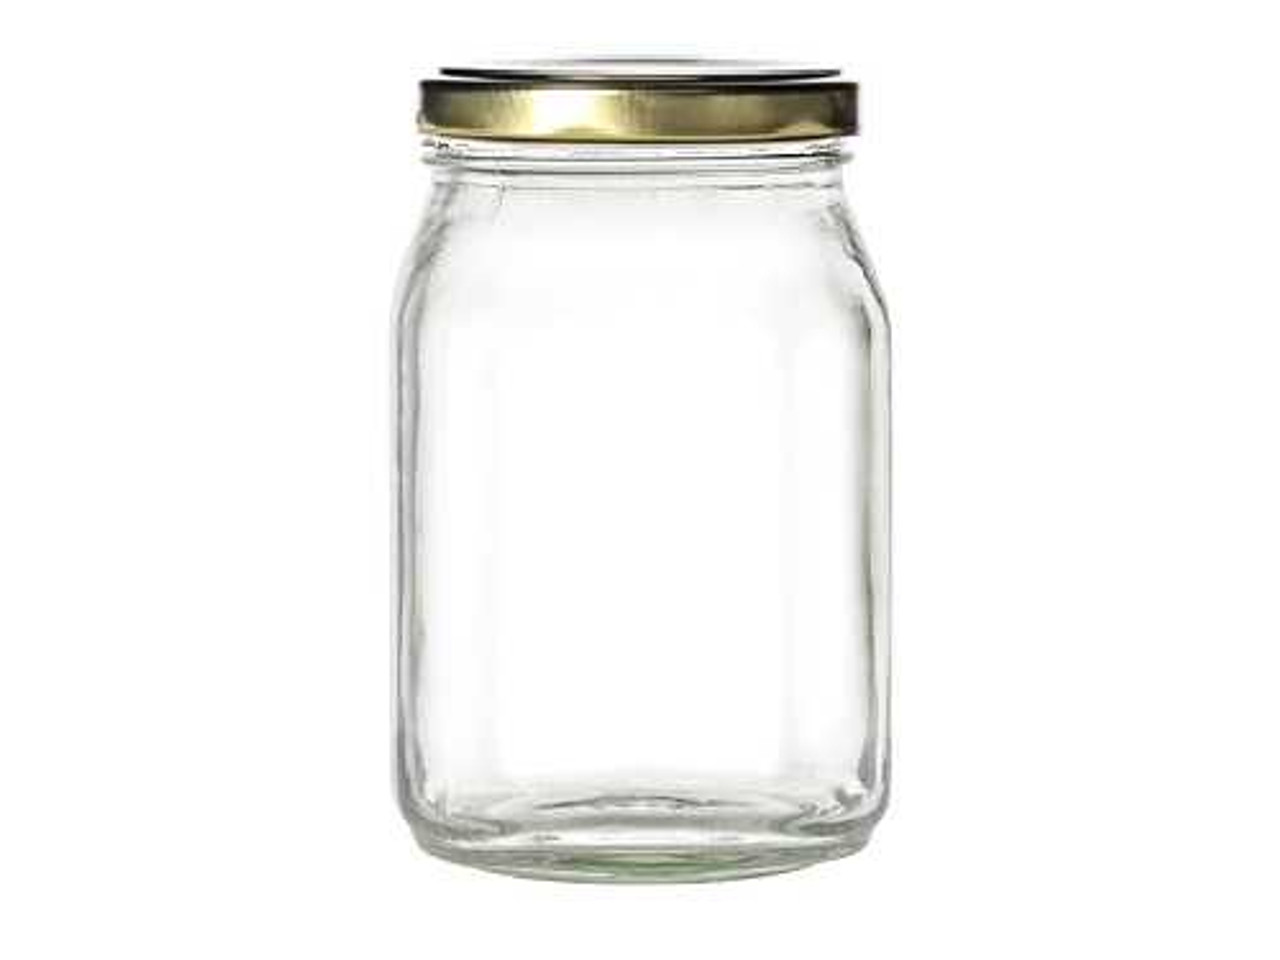 https://cdn11.bigcommerce.com/s-1ybtx/images/stencil/1280x1280/products/1288/6722/16-oz-Victorian-Square-Glass-Jar-with-Lid-Made-in-Europe_4959__24917.1674335923.jpg?c=2?imbypass=on